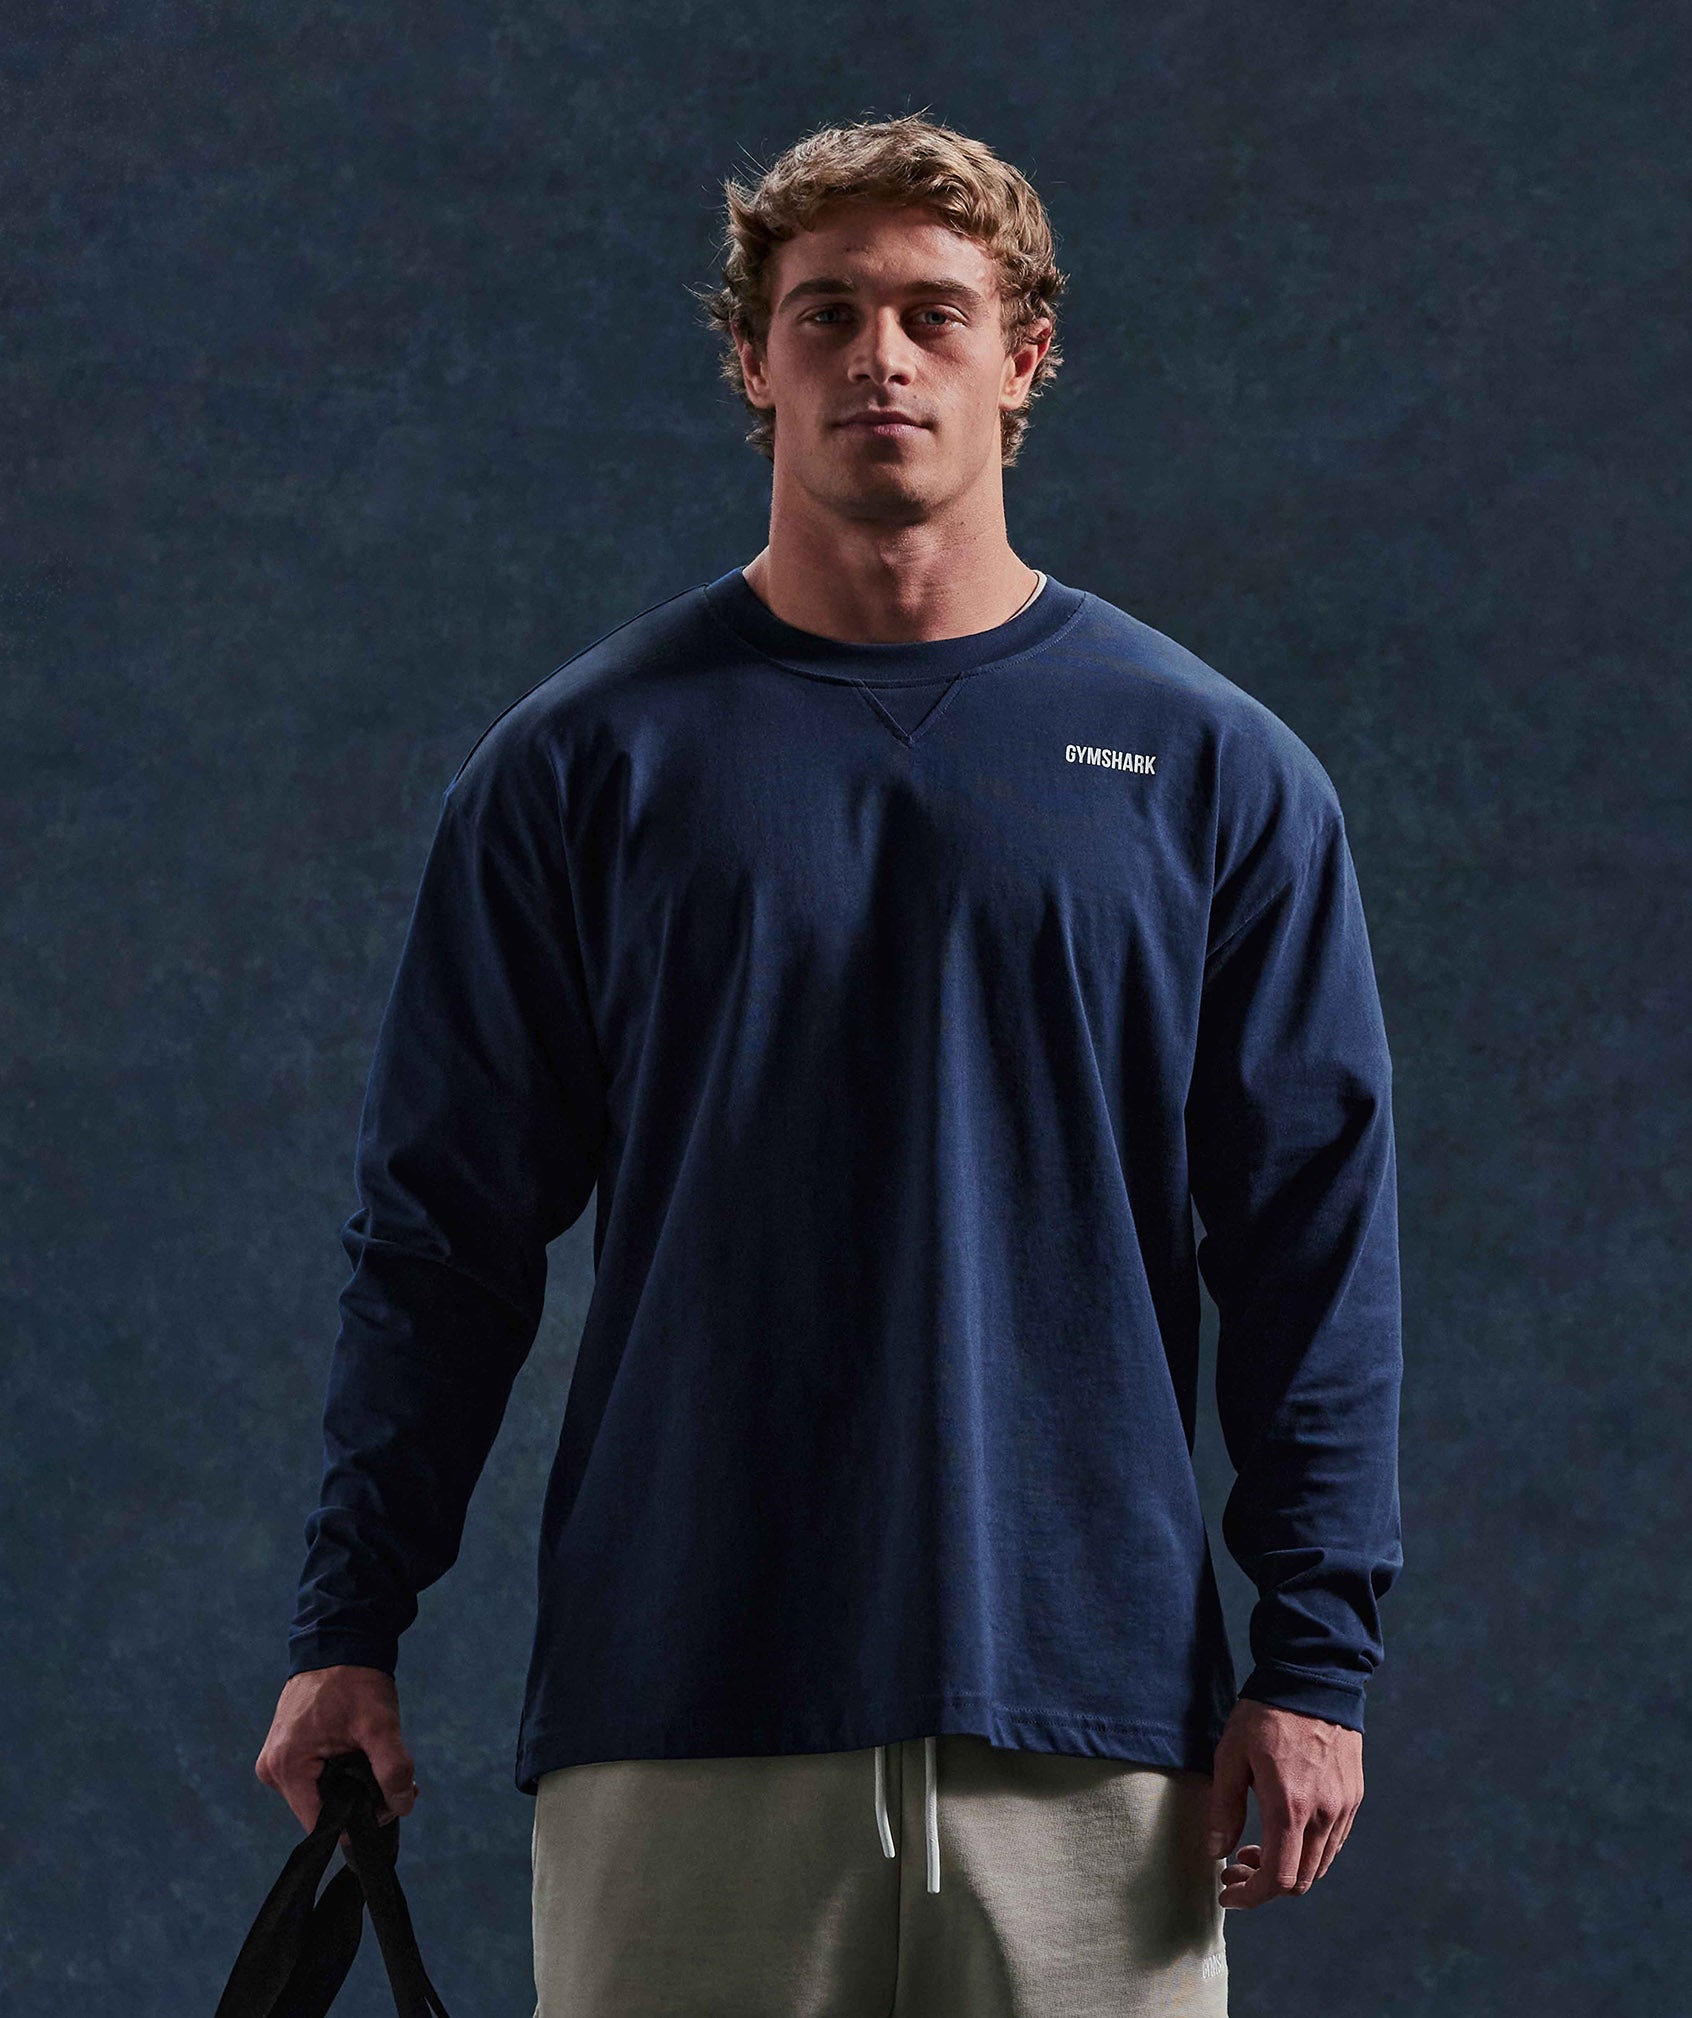 Rest Day Sweats Long Sleeve T-Shirt in {{variantColor} is out of stock